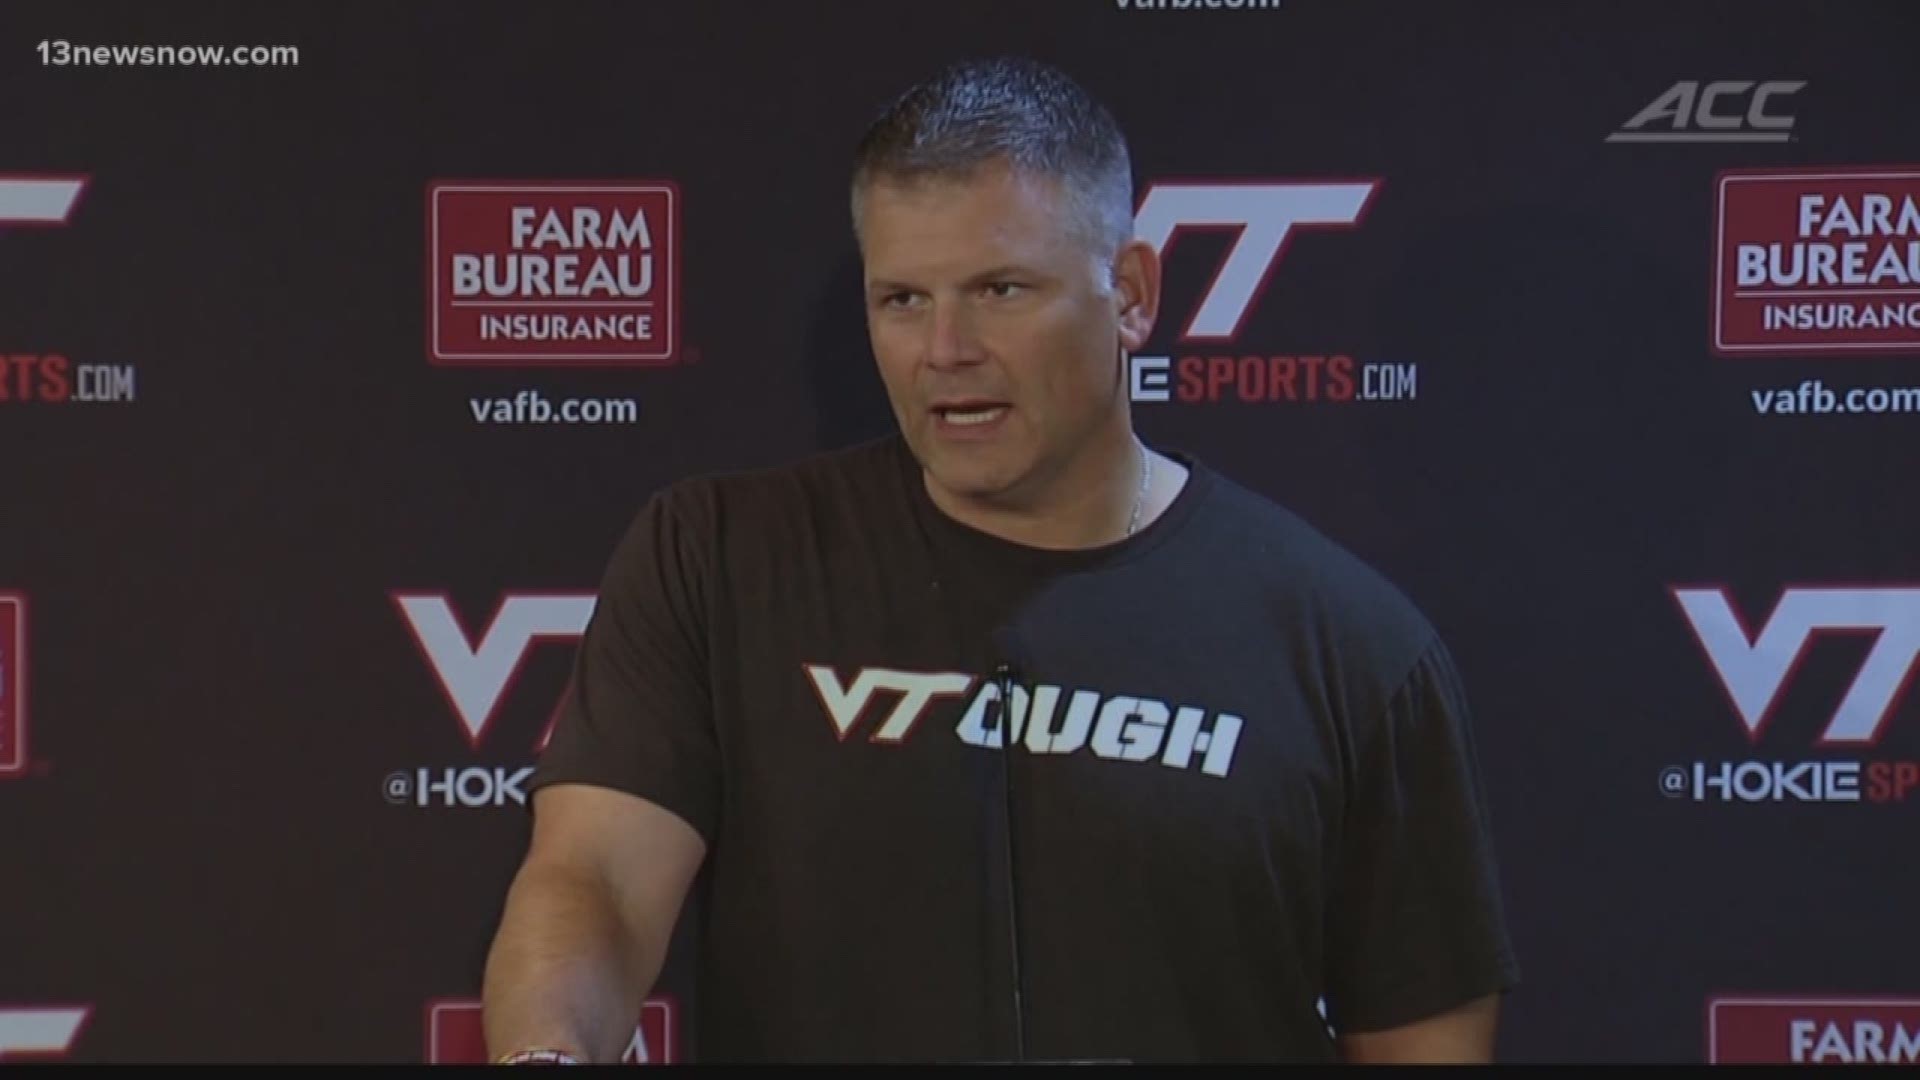 Virginia Tech head coach Justin Fuente says his team is plenty excited to bring their brand of football to Norfolk this weekend.